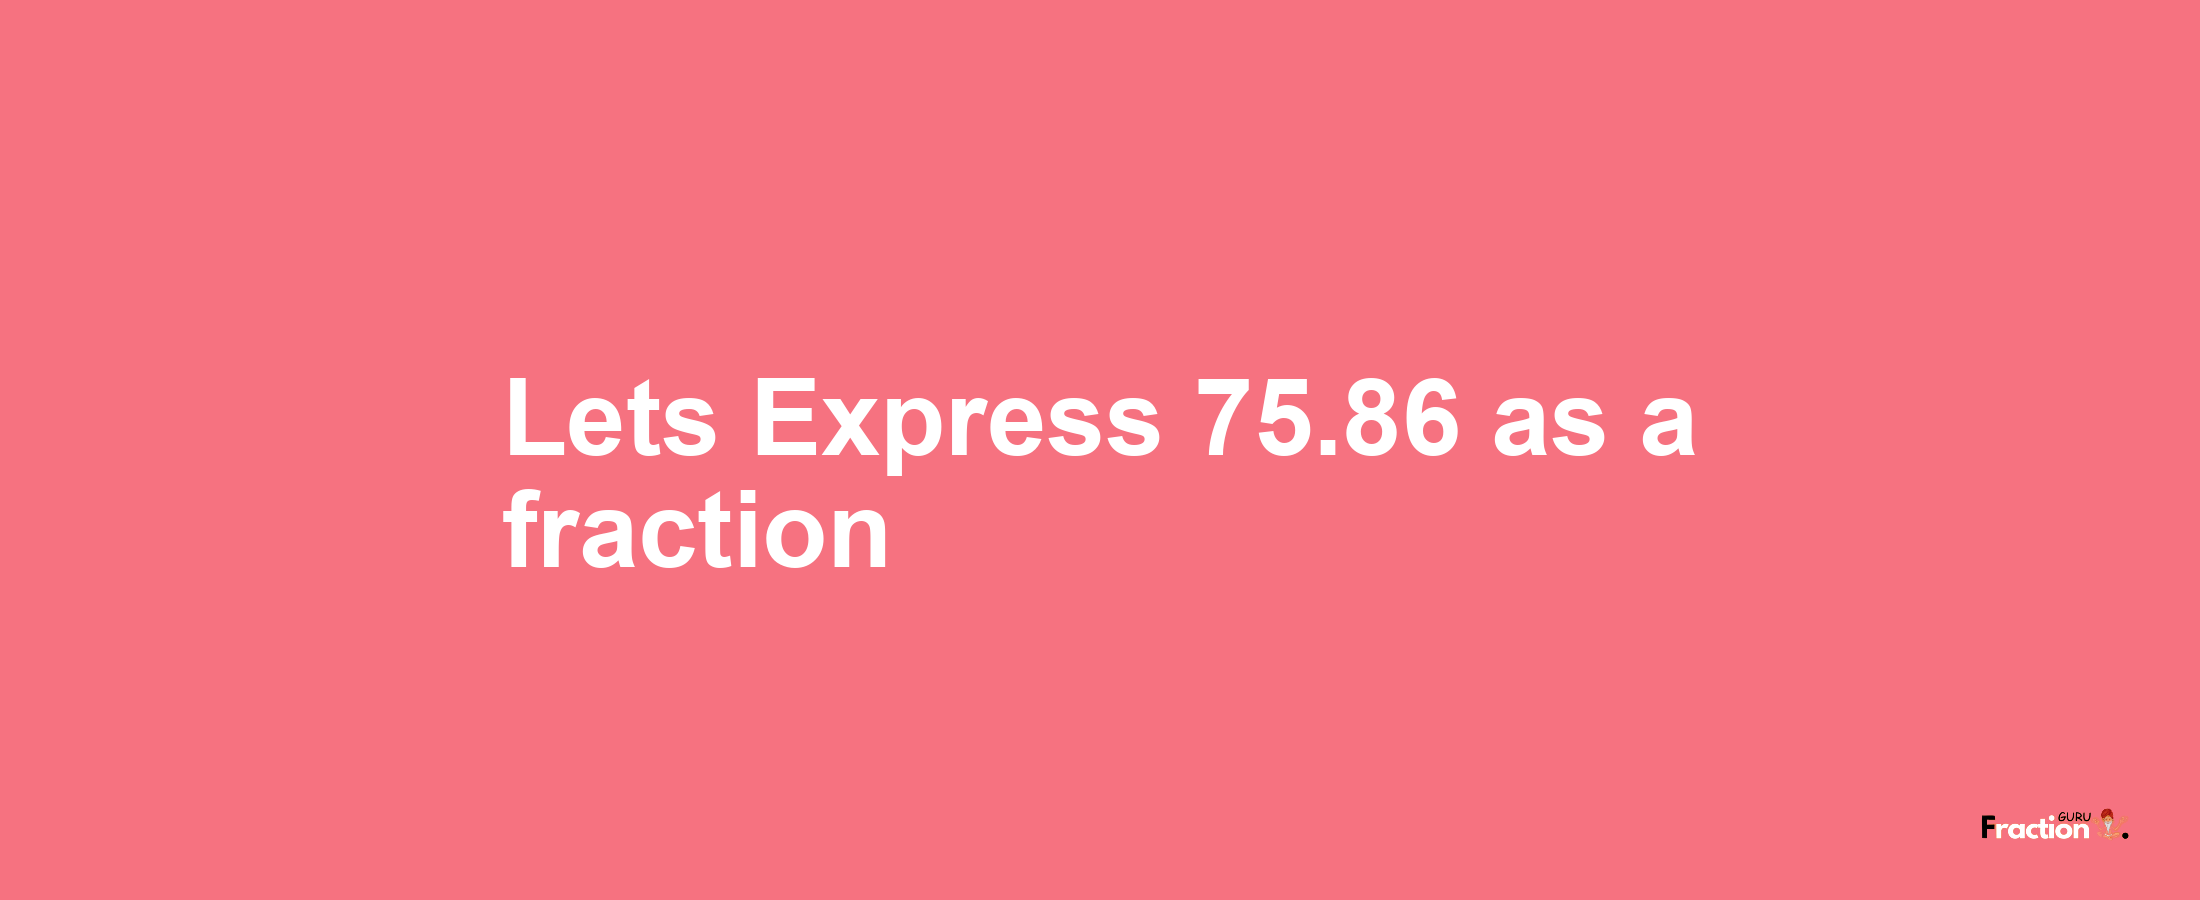 Lets Express 75.86 as afraction